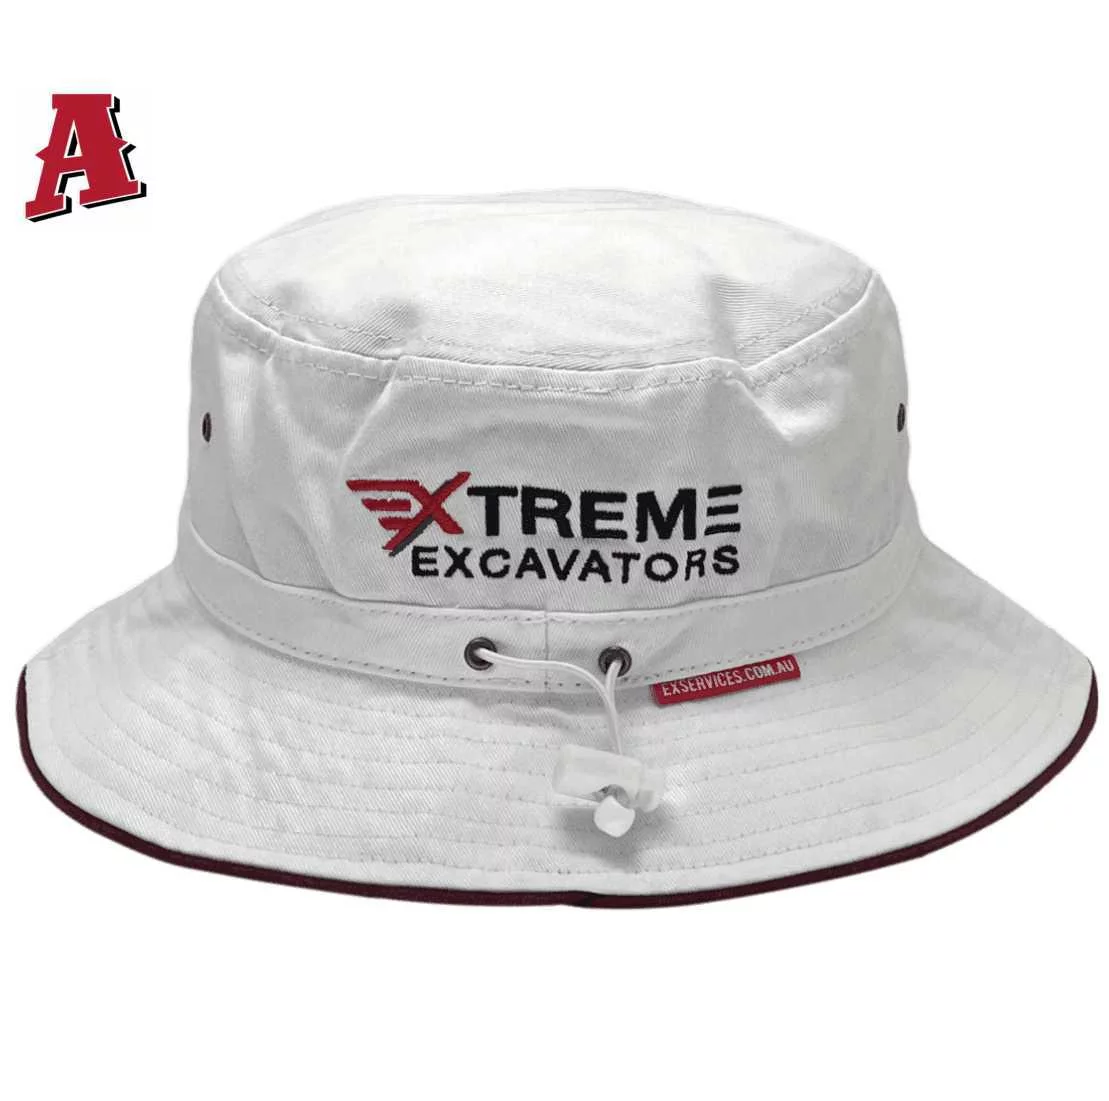 EXtreme Excavations Mackay Qld Aussie Bucket Hat One Size Fits All with Crown Toggle and Optional Brim Width White Maroon